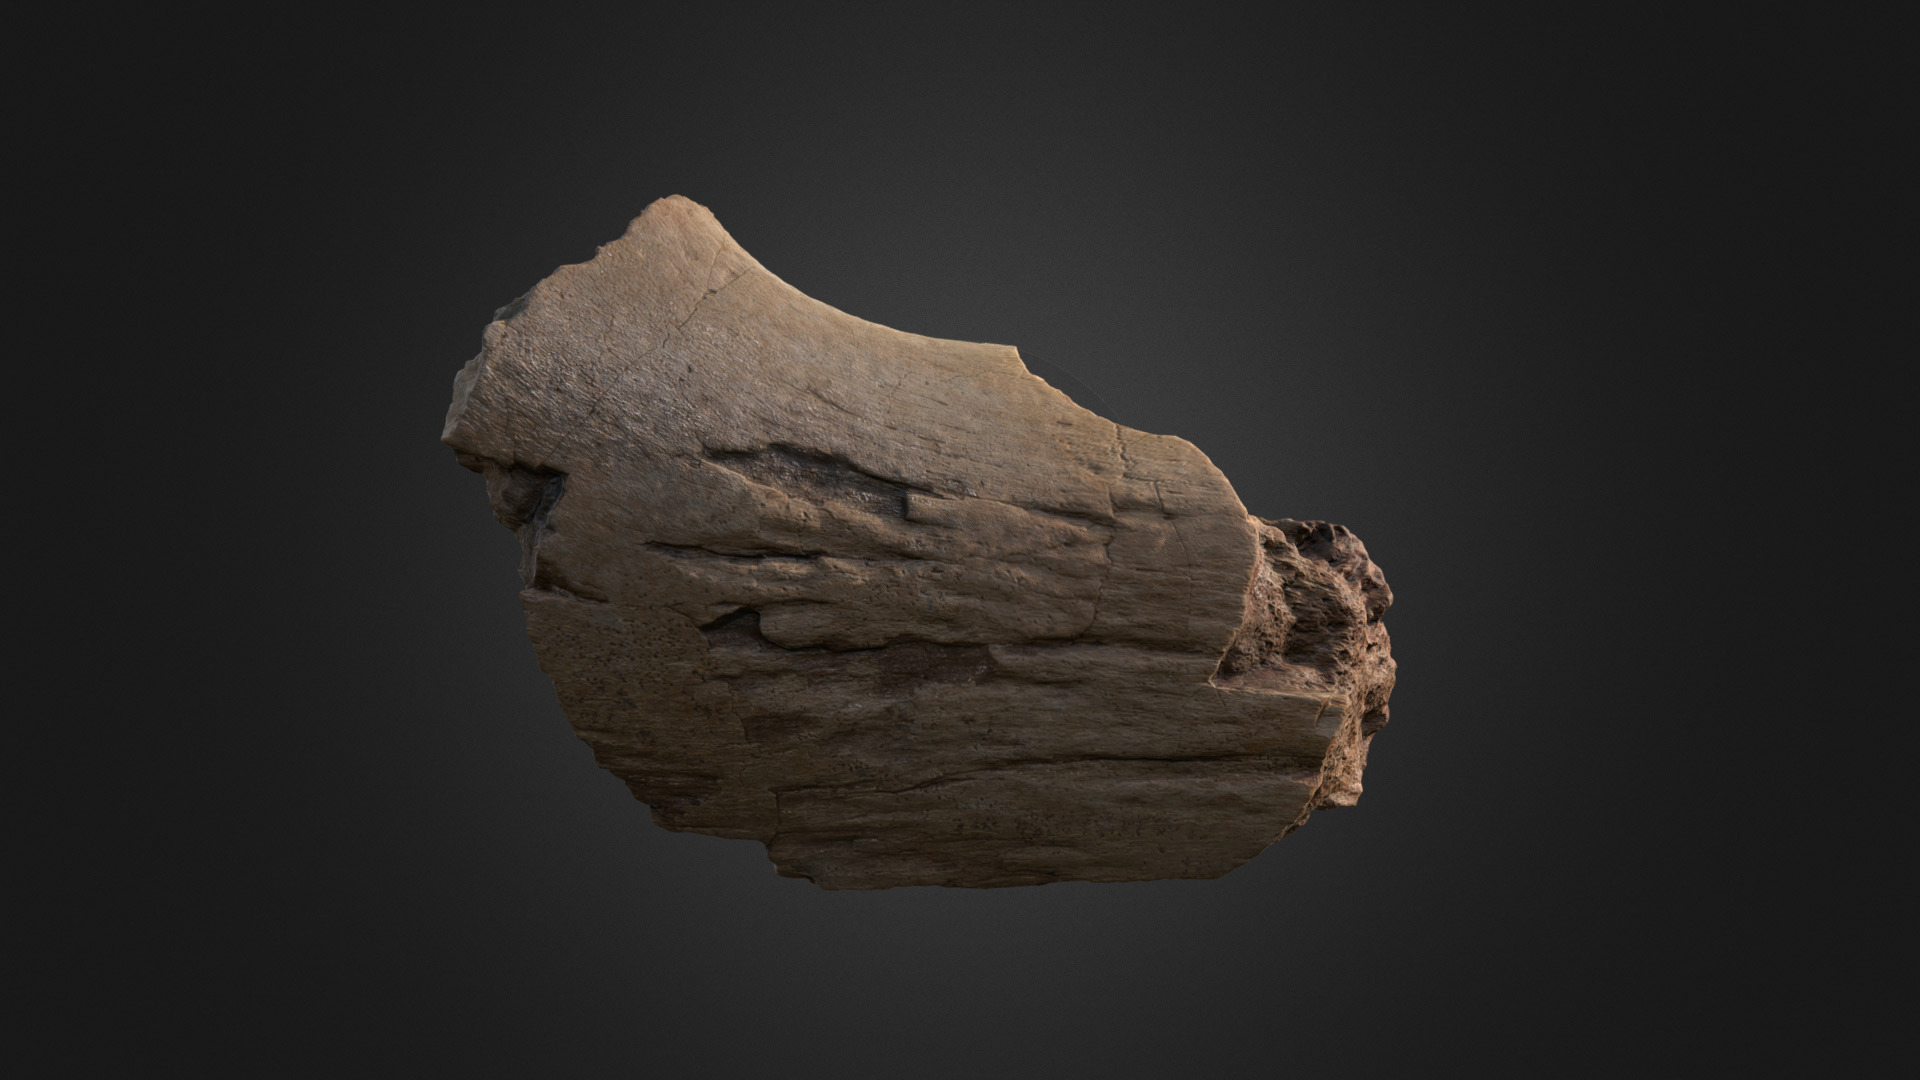 3D model Kritosaurus Jaw Fragment - This is a 3D model of the Kritosaurus Jaw Fragment. The 3D model is about a stone with a face carved into it.